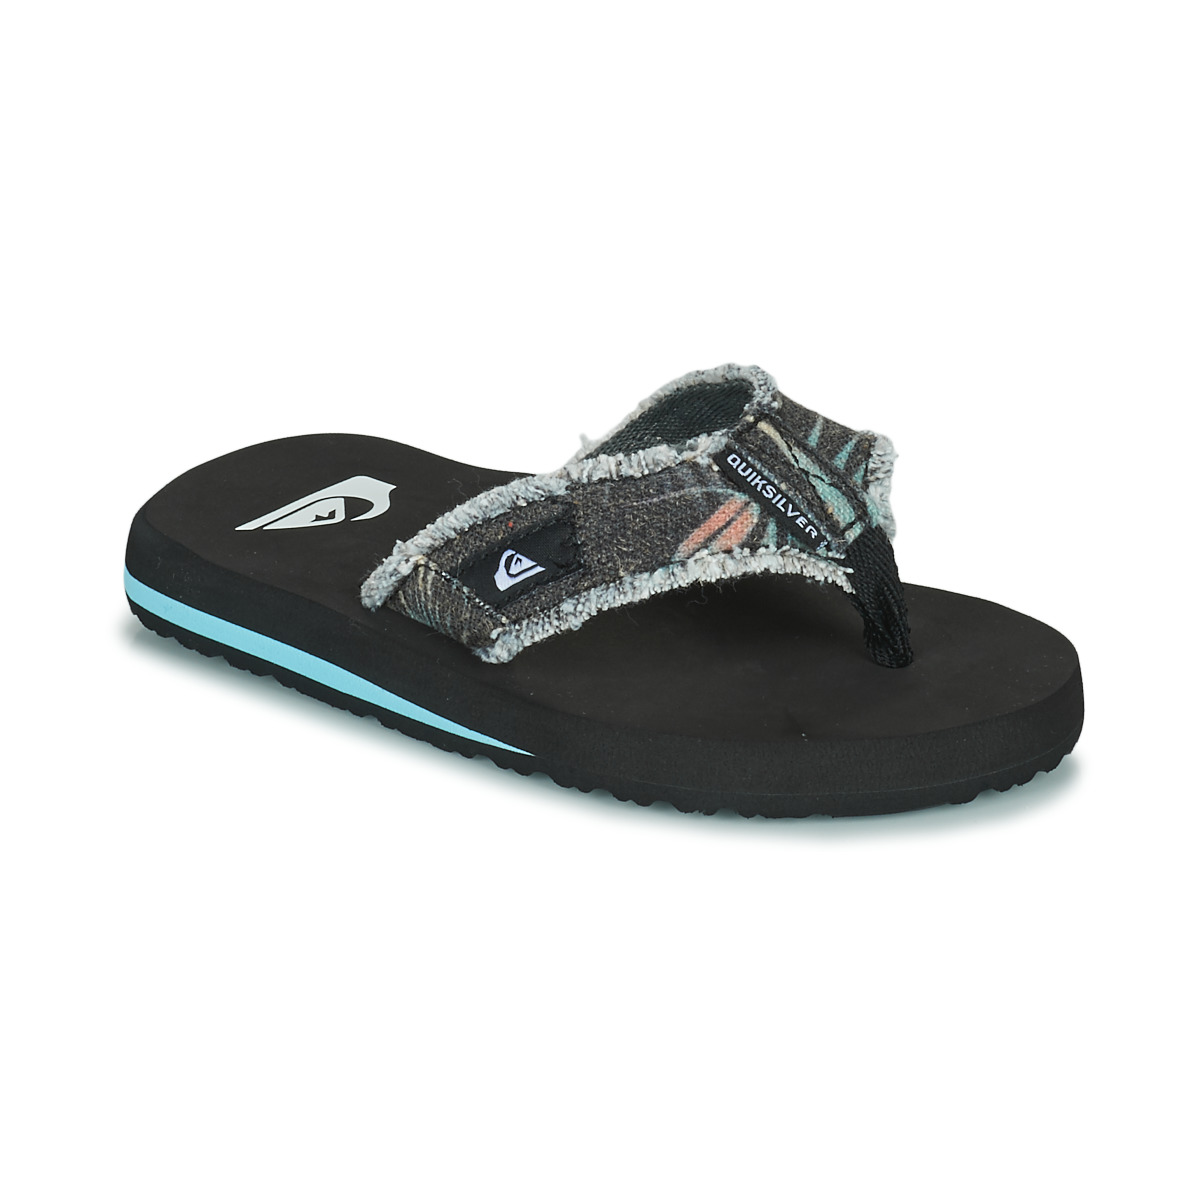 Quiksilver Monkey Abyss Youth Black